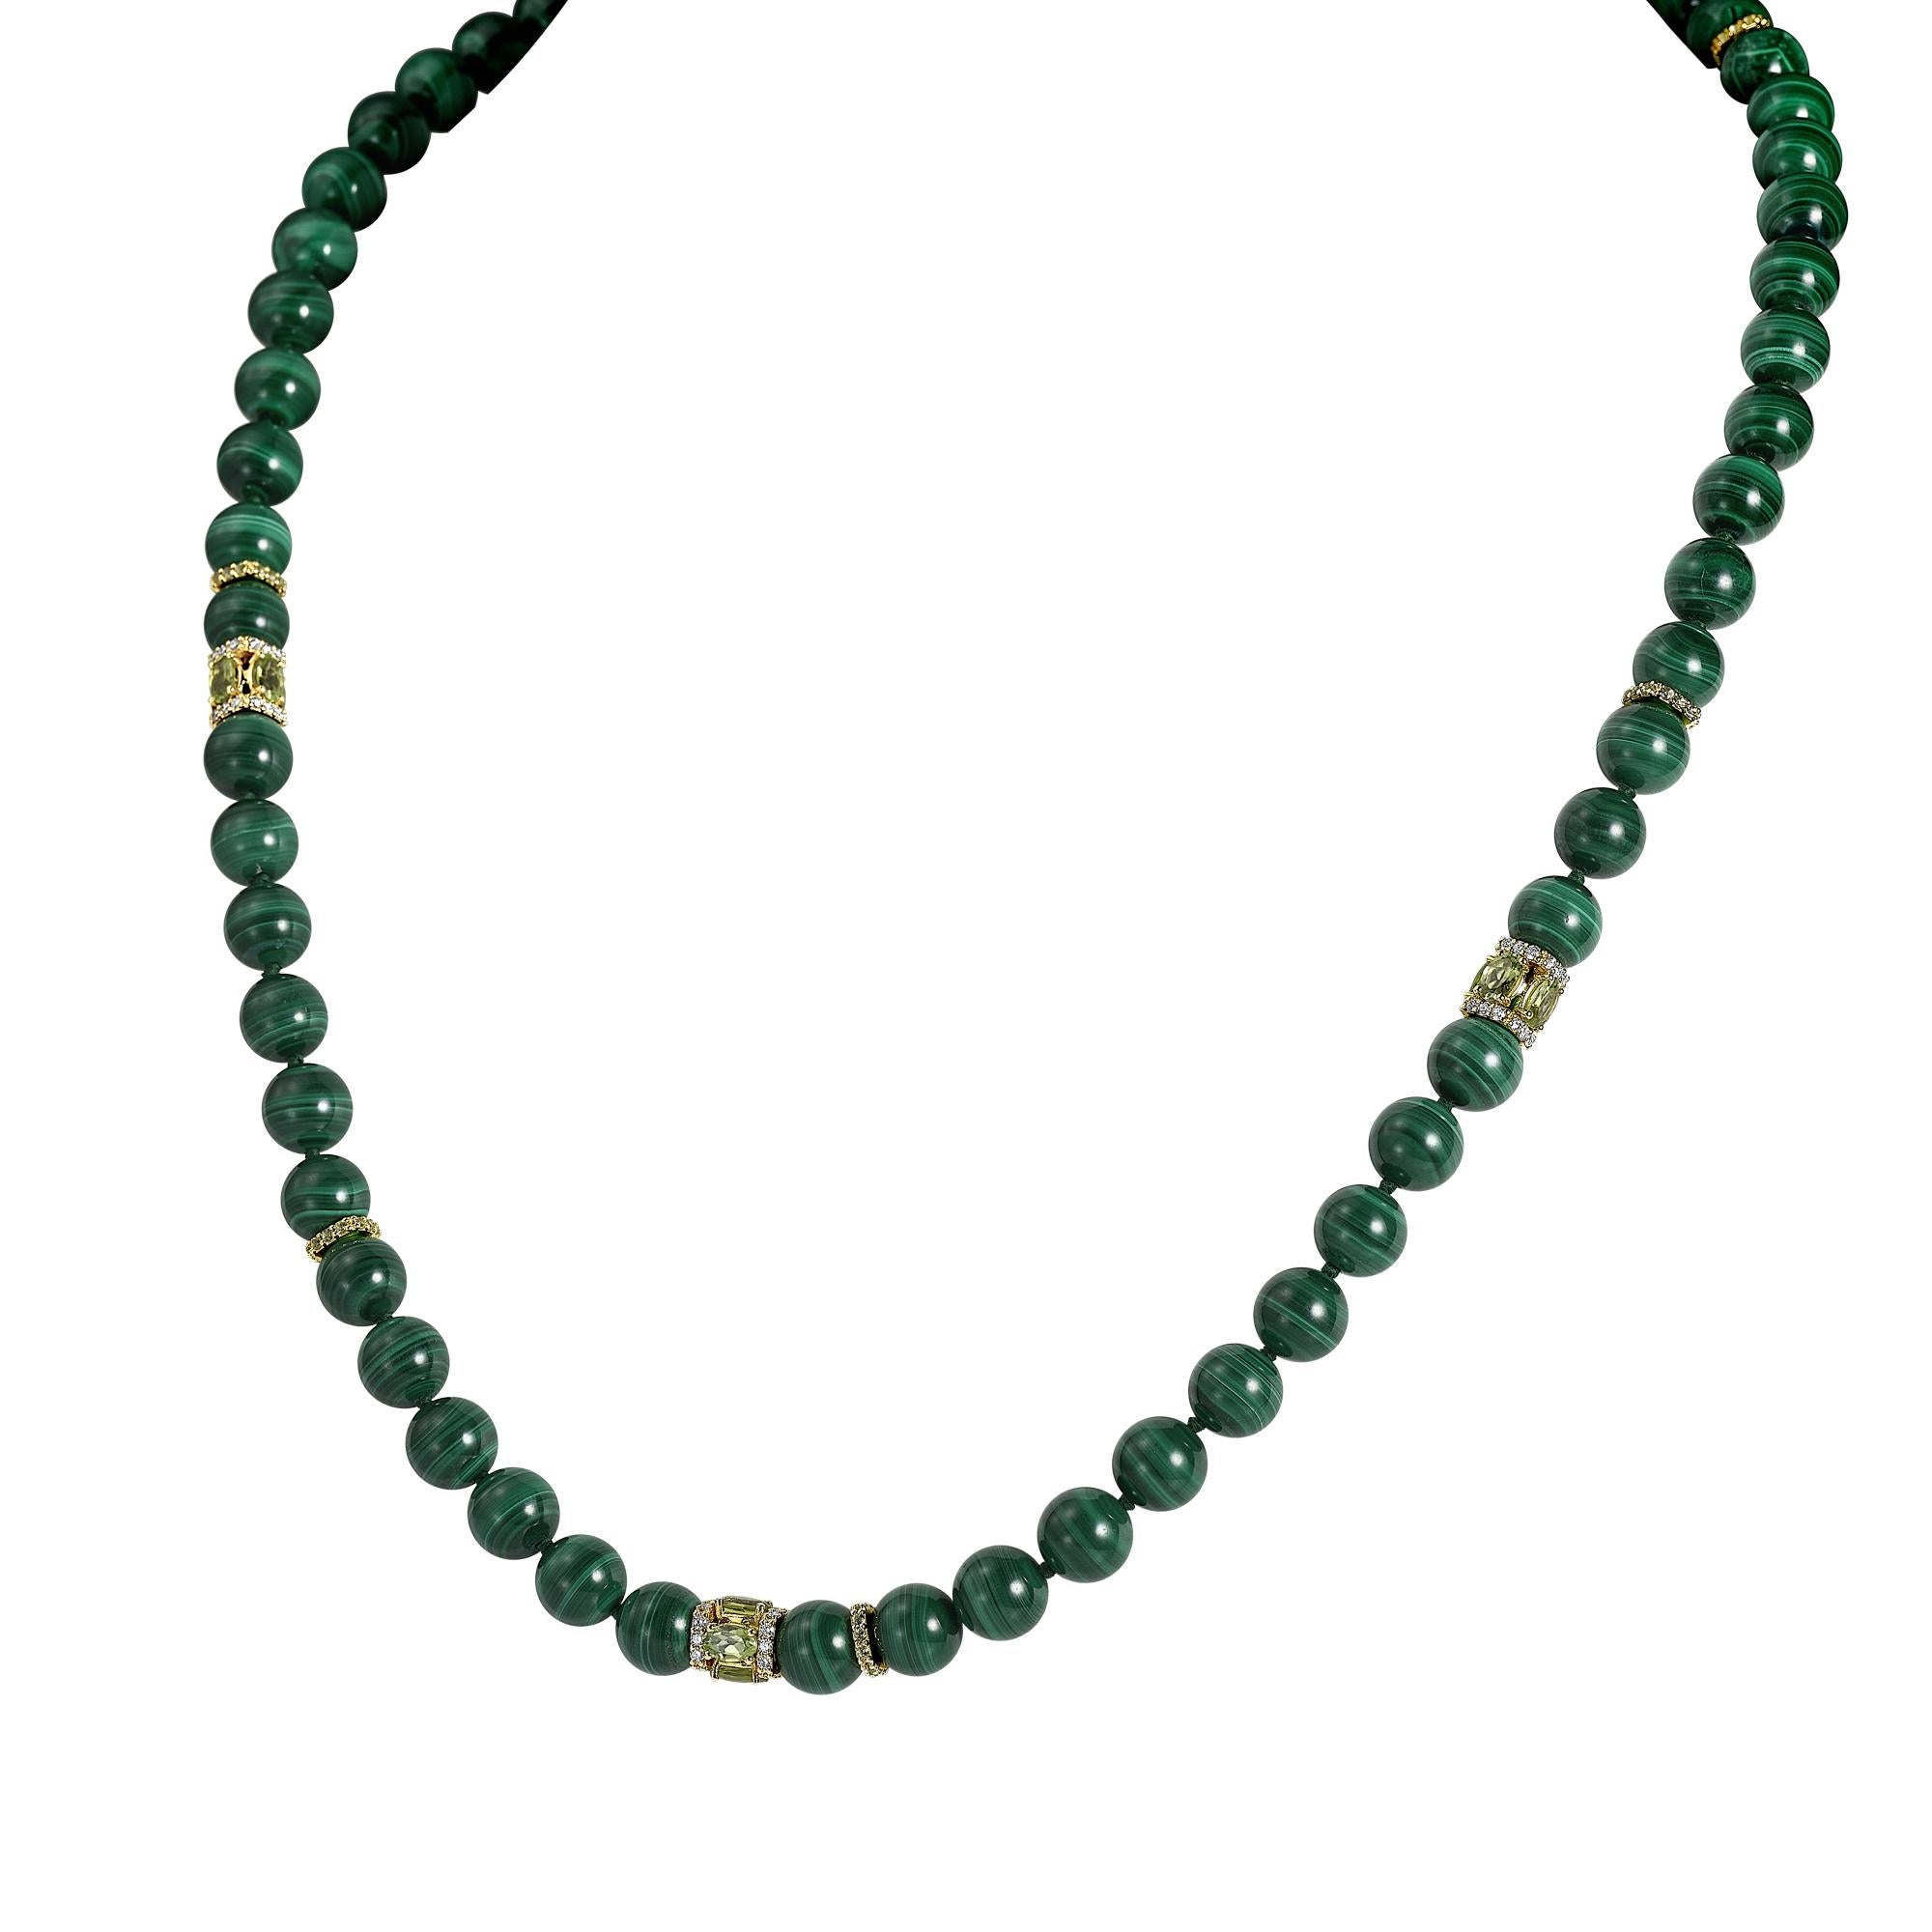 Faro collection long necklace with malachite beads, 18K yellow gold, white diamonds (approx. 2.28 carats), and peridot (approx. 11.04 carats)